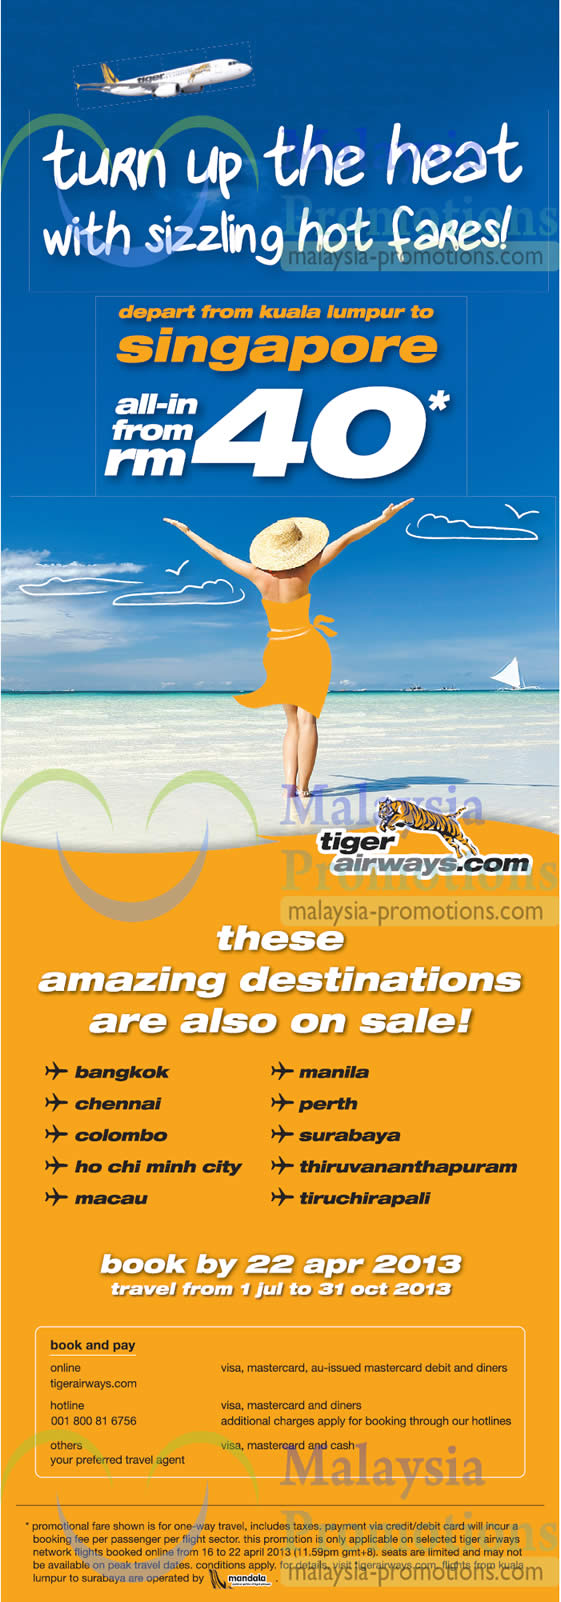 Featured image for (EXPIRED) Tiger Airways Singapore Promotion Air Fares 16 – 22 Apr 2013